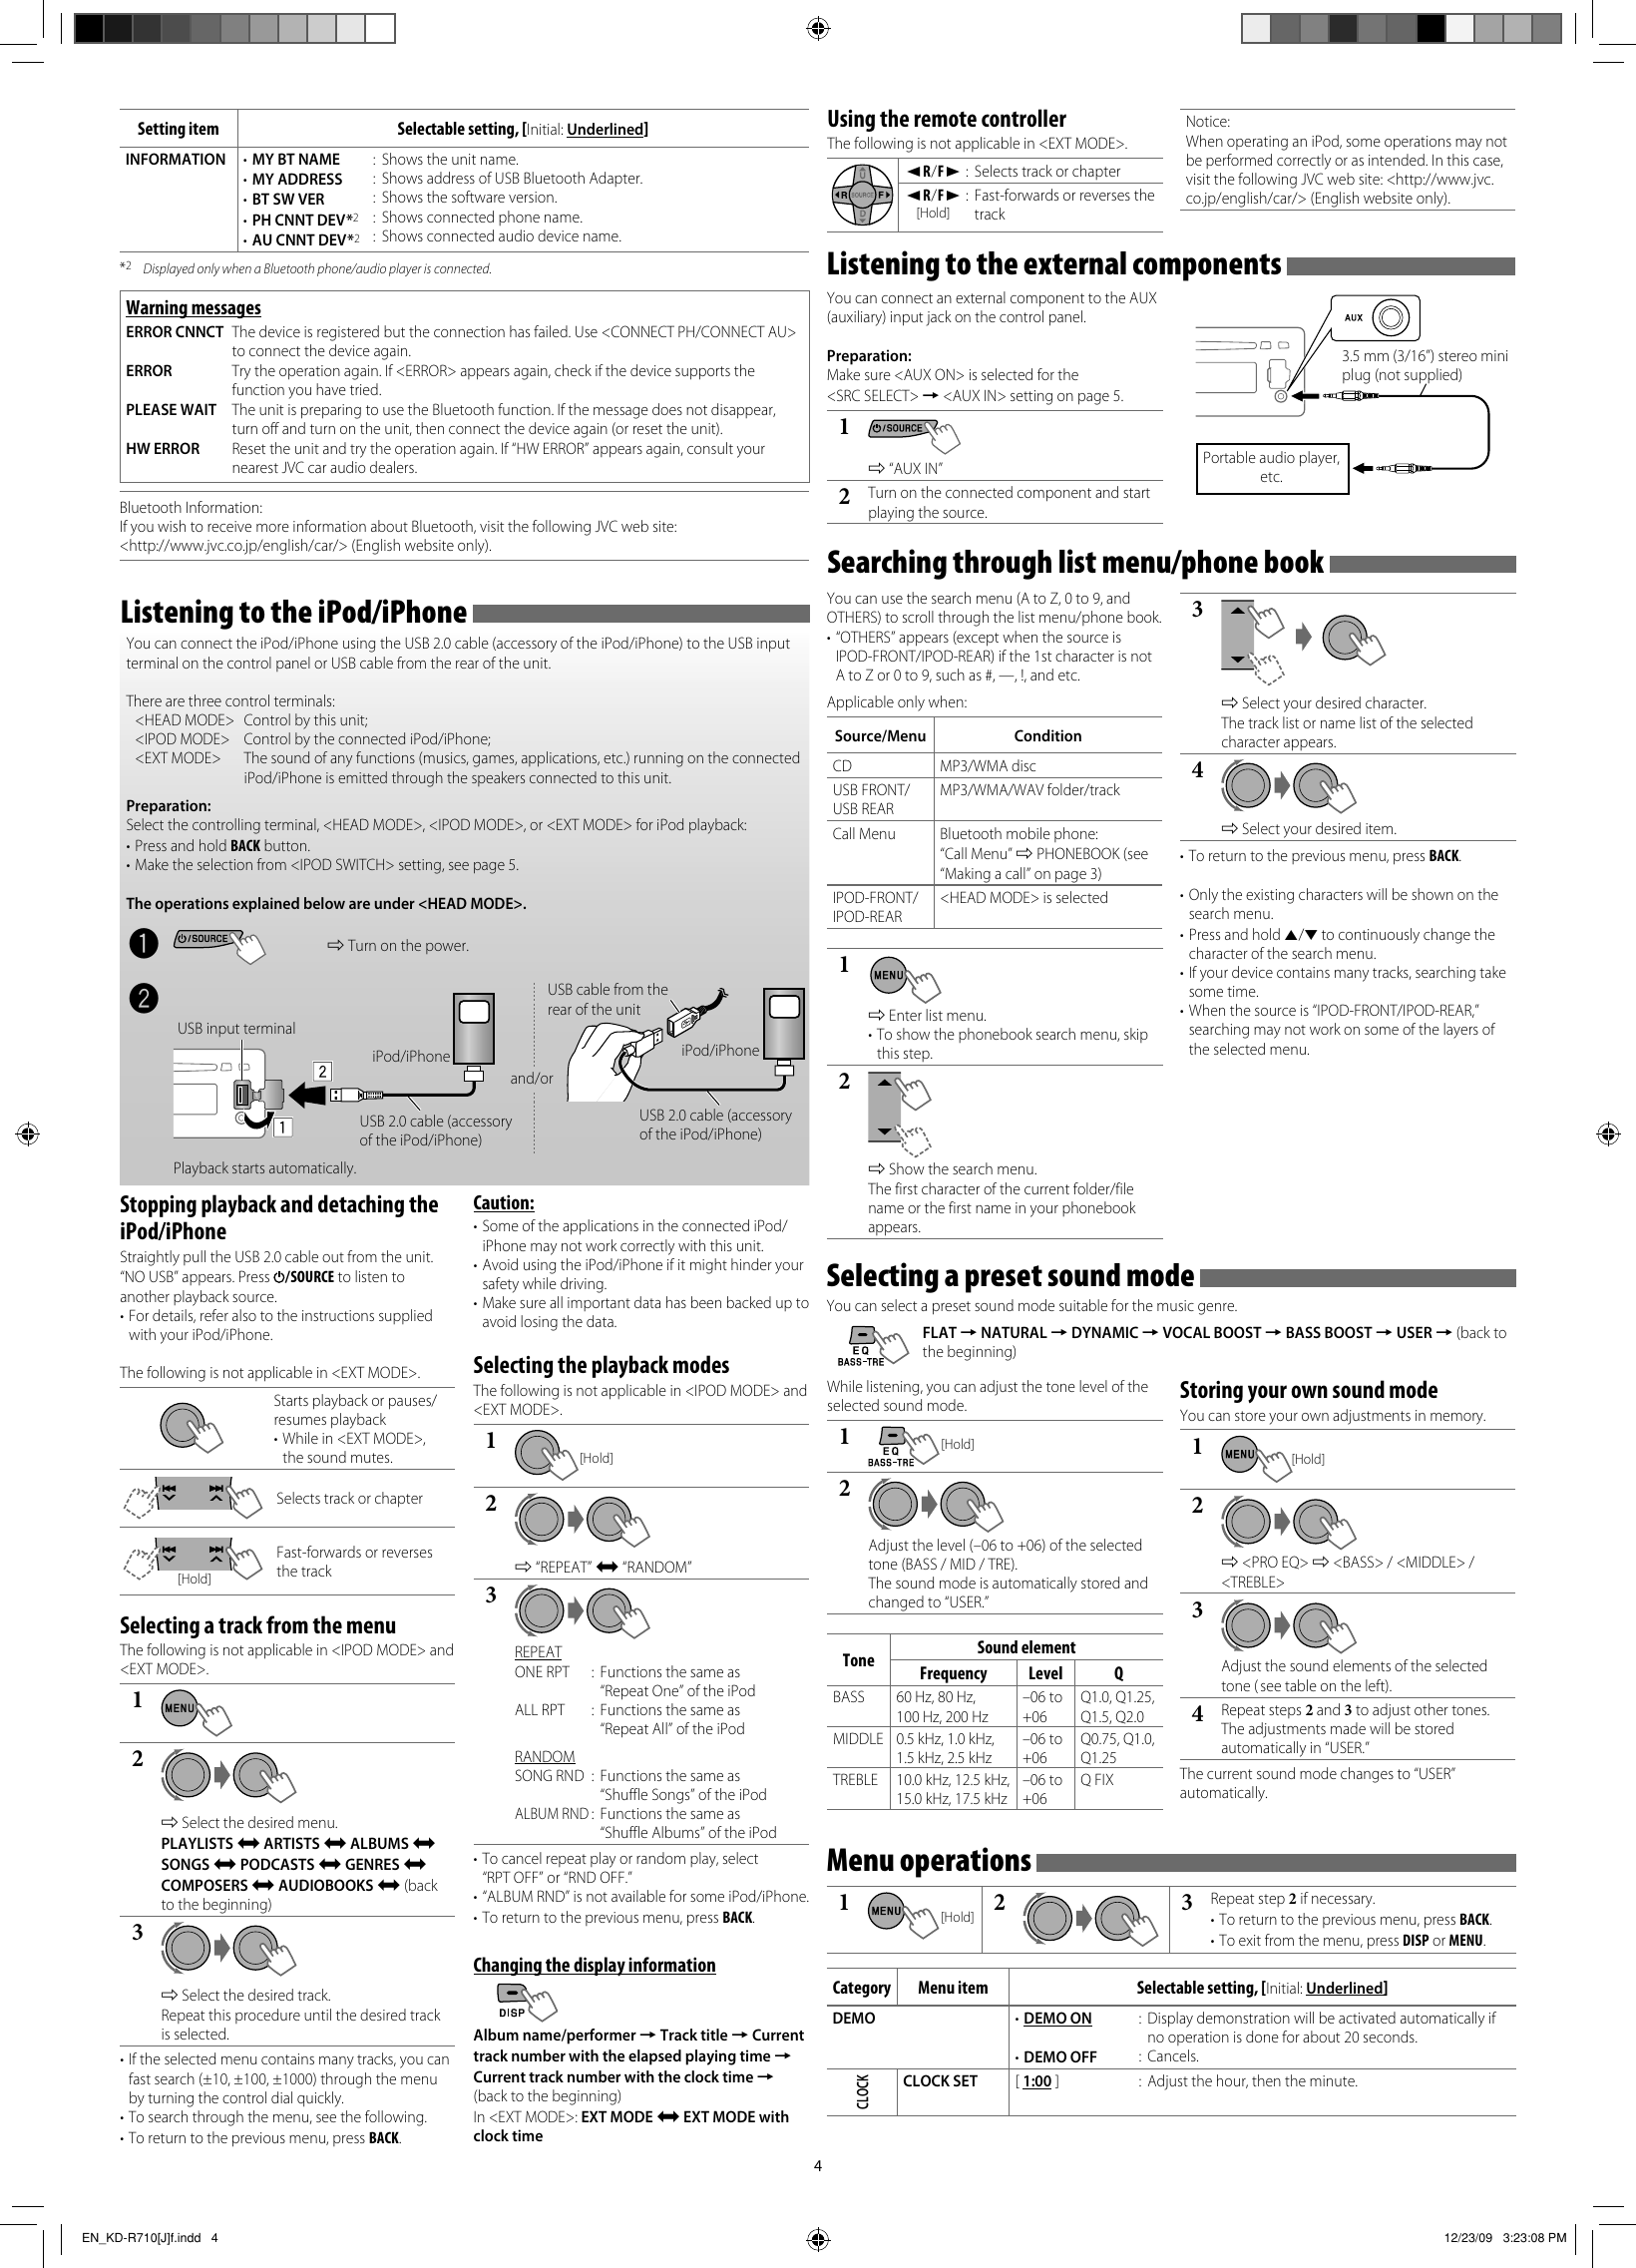 Page 4 of 8 - Jvc Jvc-Car-Stereo-System-Kd-R710-Users-Manual- EN_KD-R710[J]f  Jvc-car-stereo-system-kd-r710-users-manual